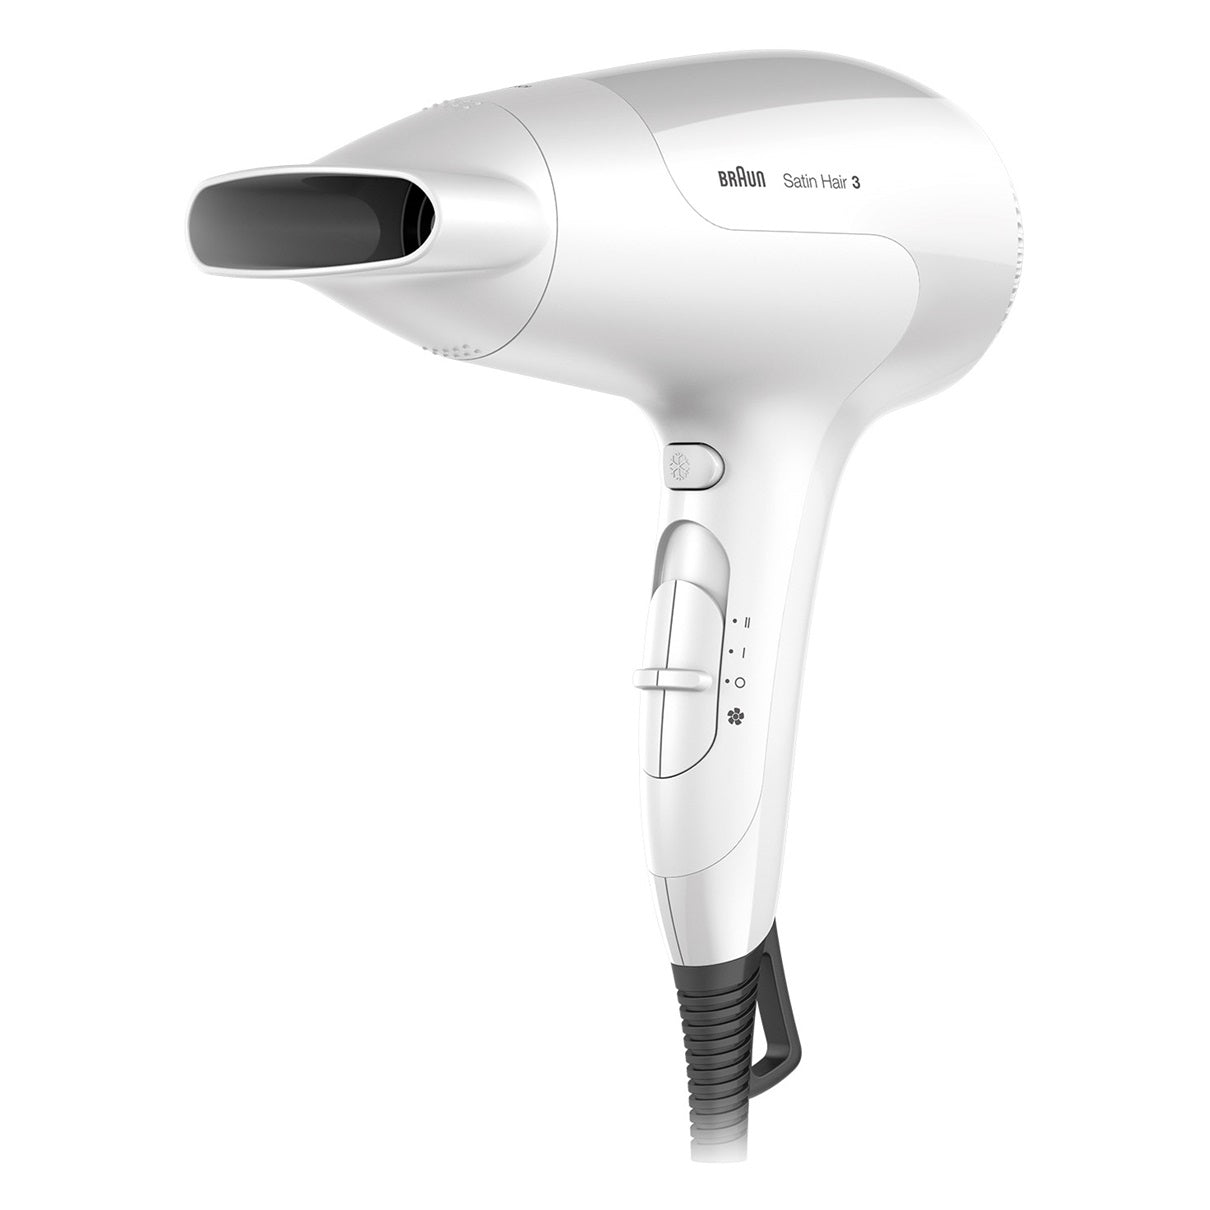 Braun Satin Hair 3 Ionic Power Perfection Dryer | Color White & Silver | Power 200W | Best Personal Care Accessories in Bahrain | Halabh